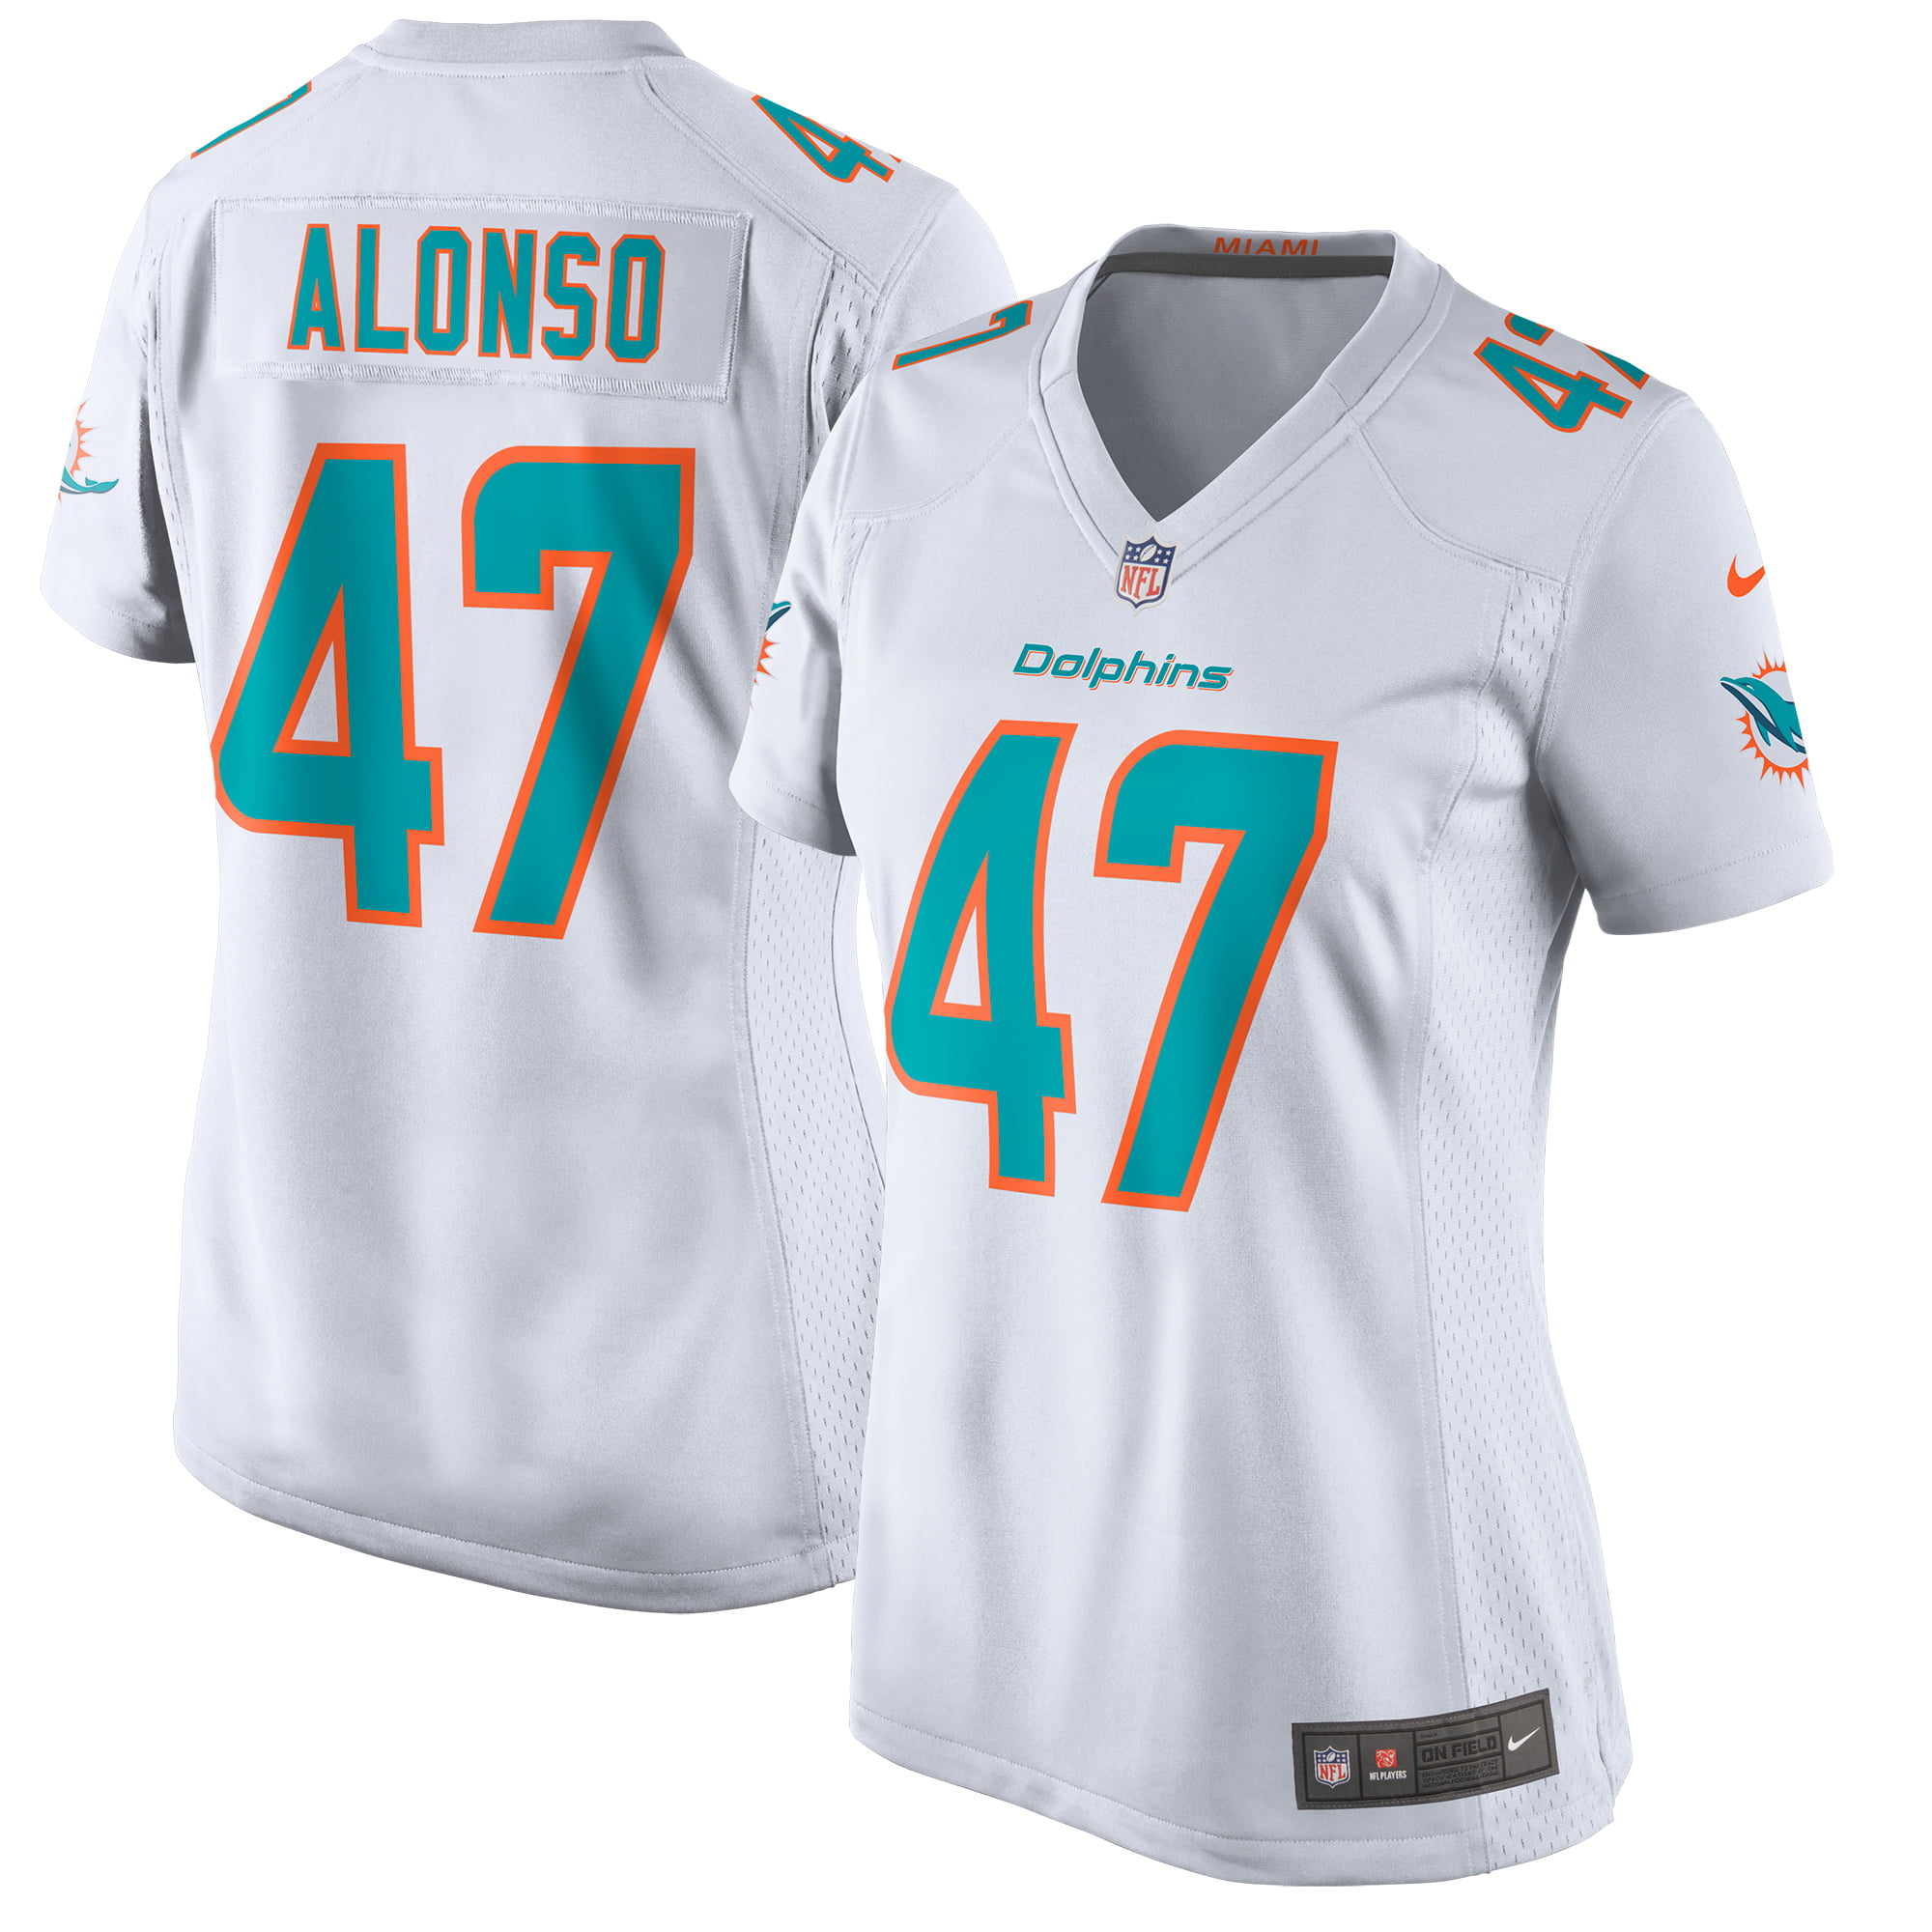 where can i buy a miami dolphins jersey